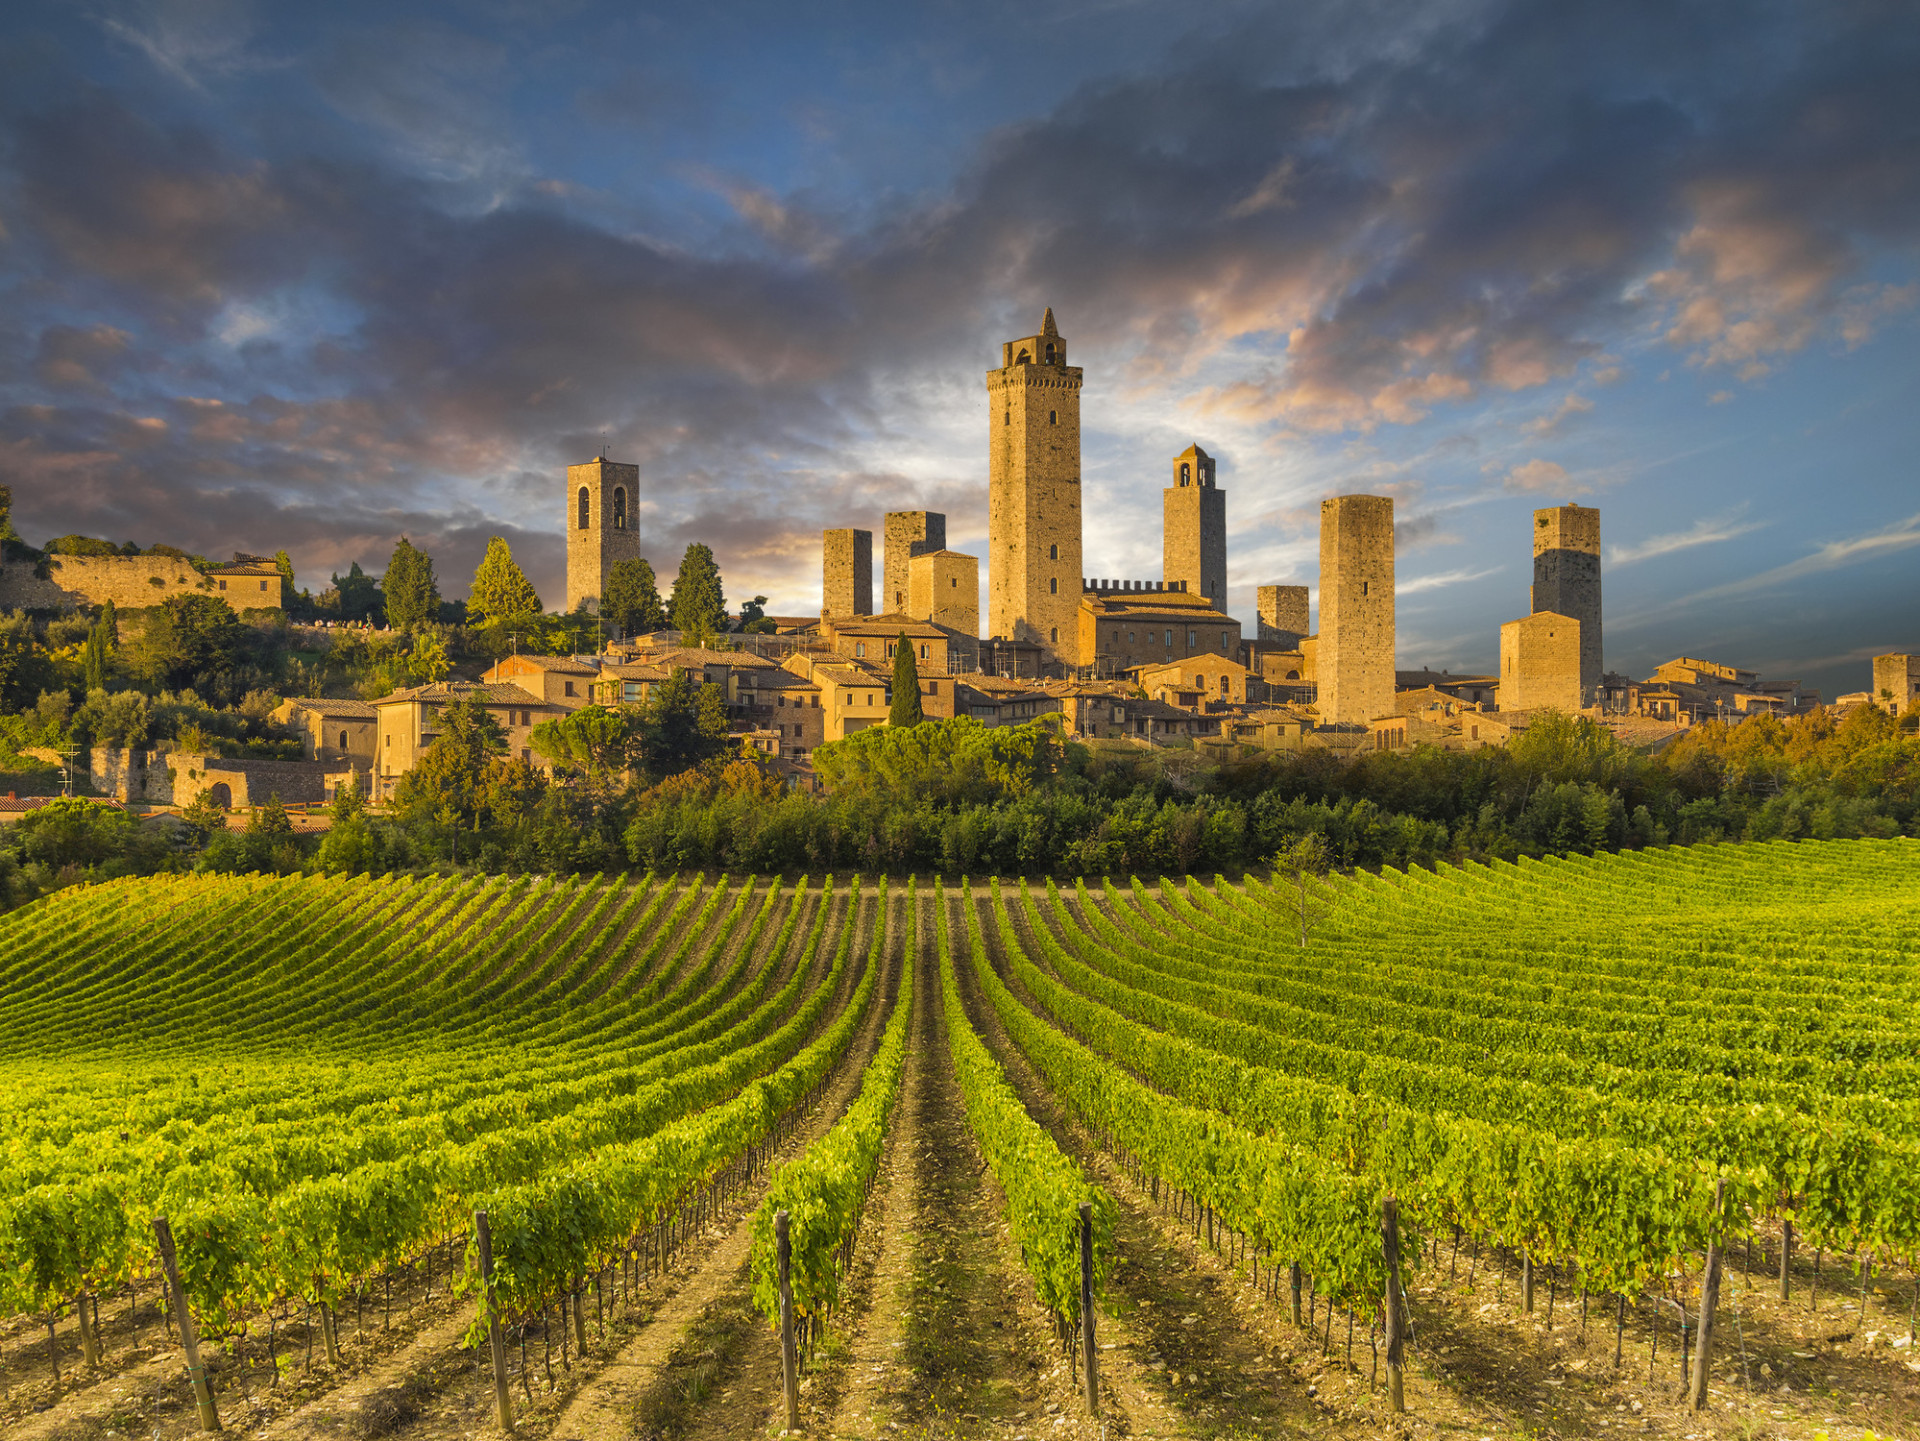 For a highly rewarding wine tour, drive down from Florence to Sienna and Montalcino. The route takes in no less than six of the region's top wineries and Renaissance-era towns and hamlets.<p><a href="https://www.msn.com/en-us/community/channel/vid-7xx8mnucu55yw63we9va2gwr7uihbxwc68fxqp25x6tg4ftibpra?cvid=94631541bc0f4f89bfd59158d696ad7e">Follow us and access great exclusive content every day</a></p>